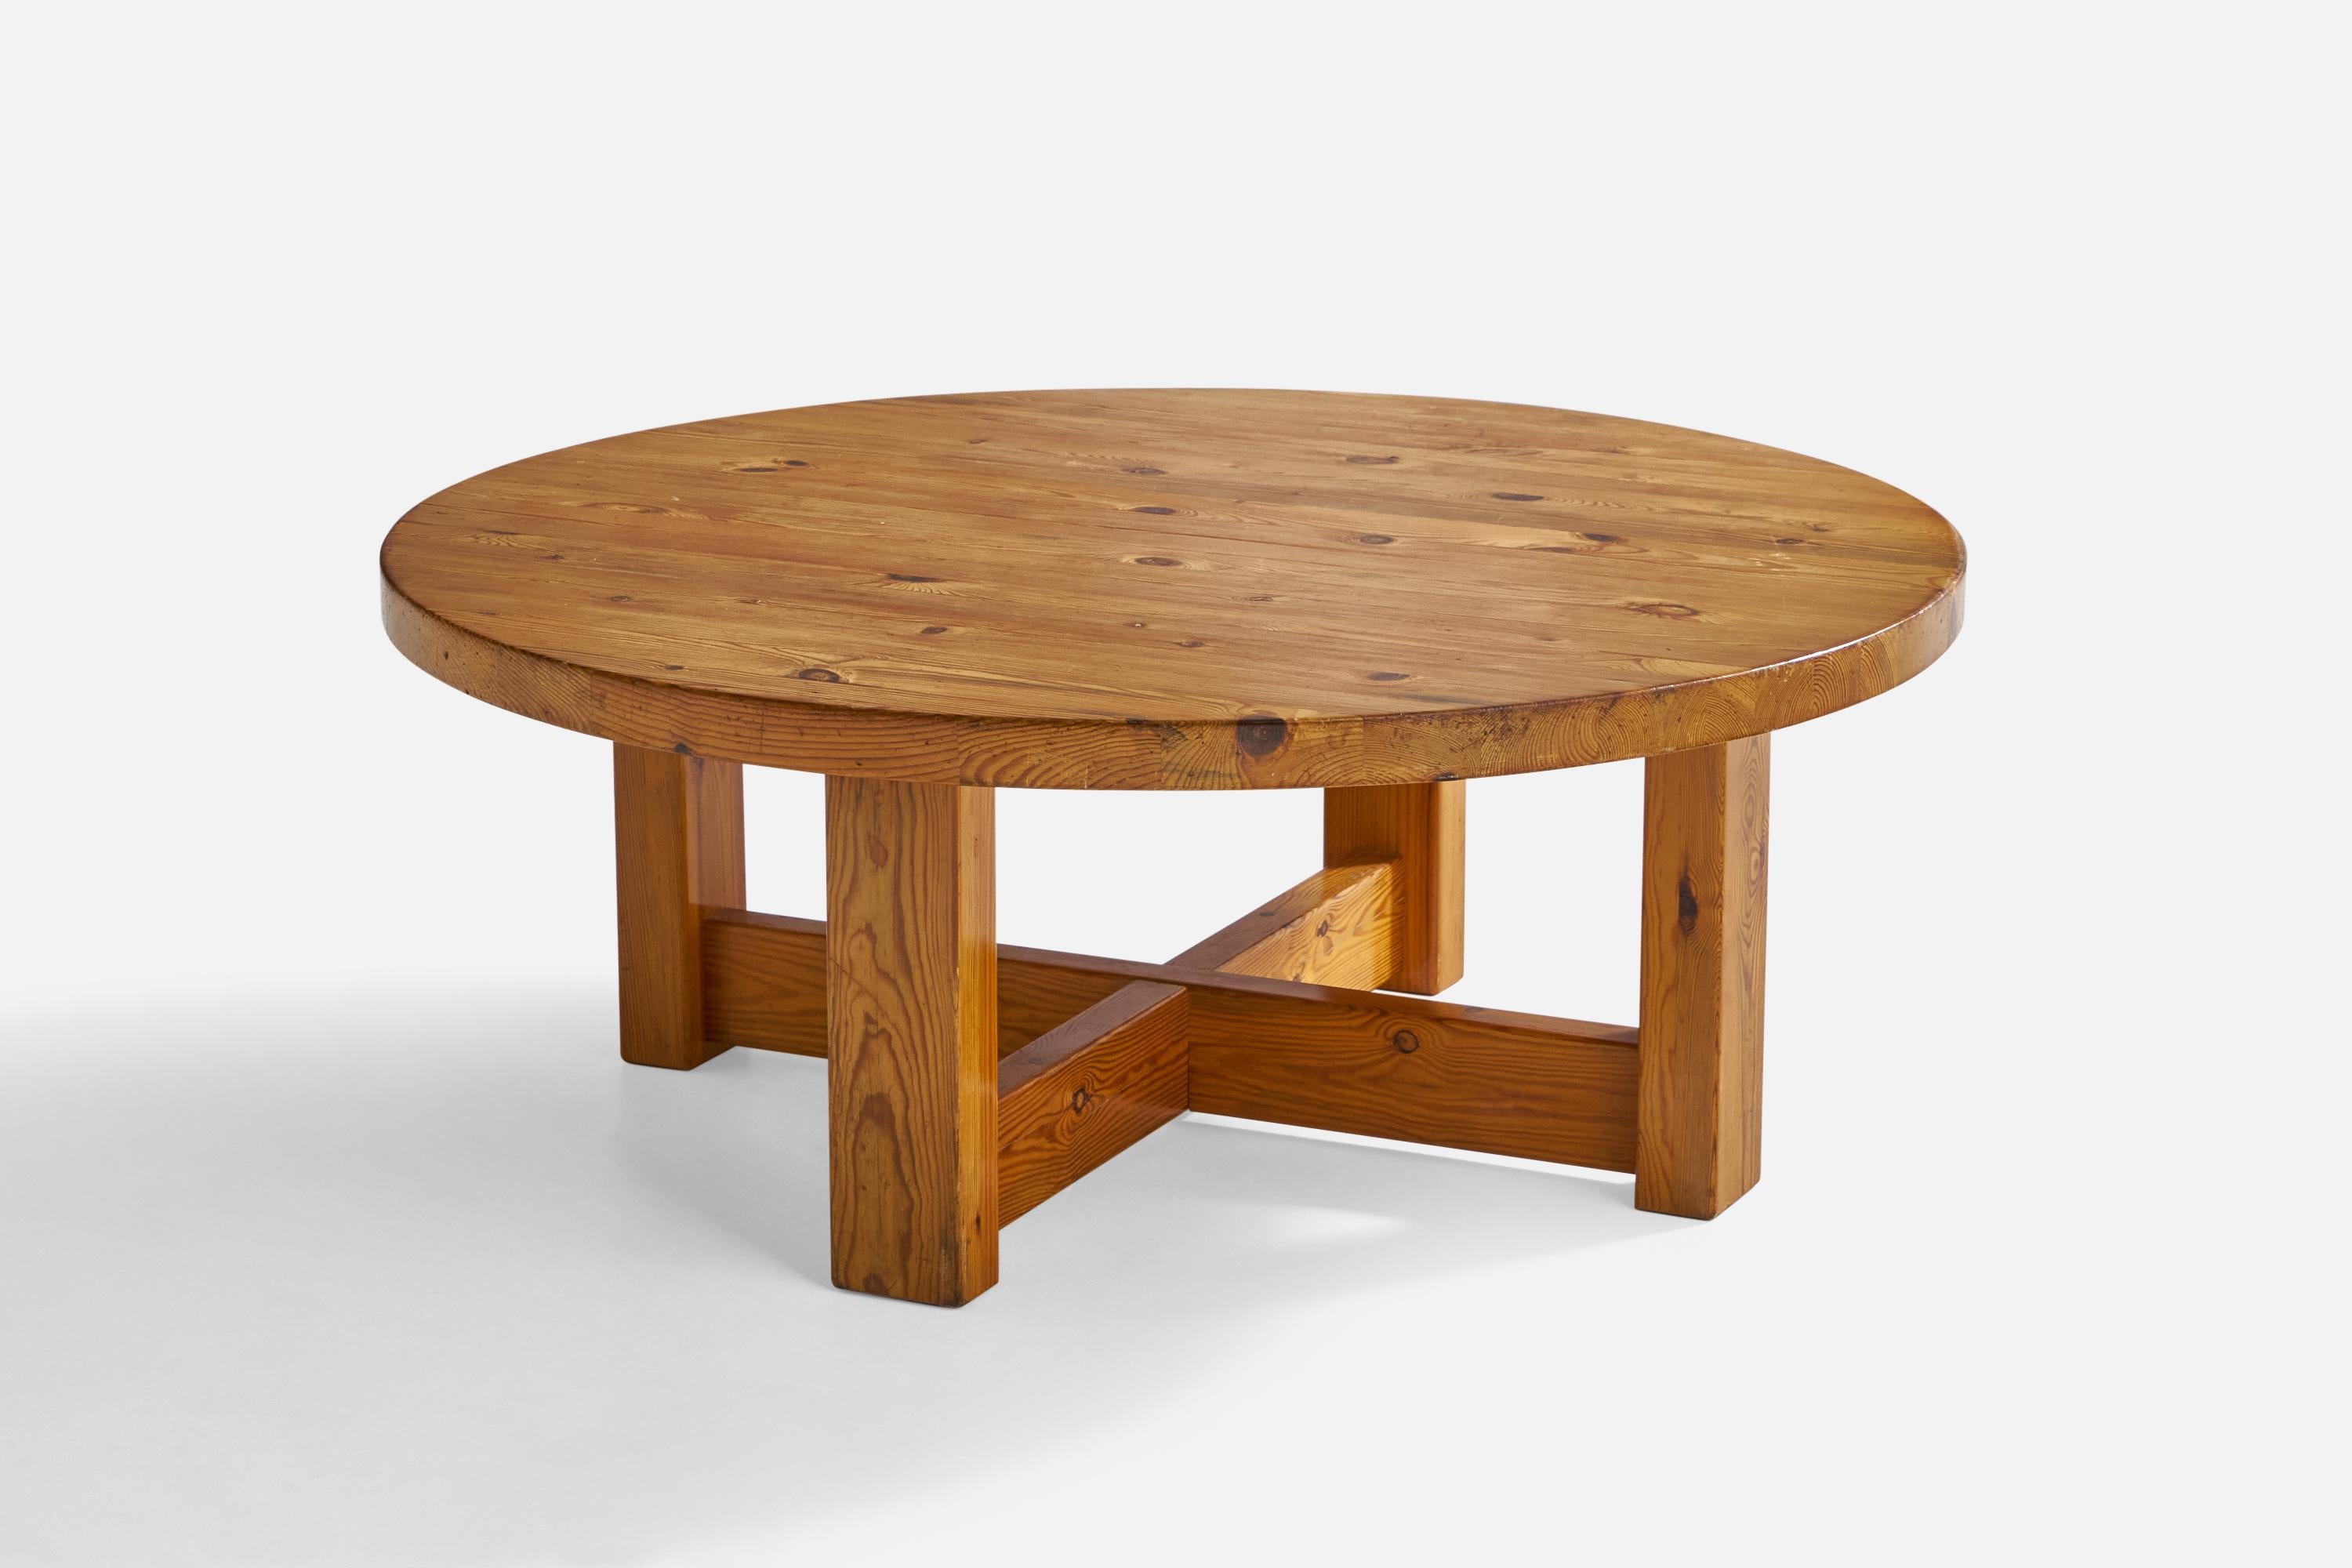 A round pine coffee table designed and produced in Sweden, c. 1960s.